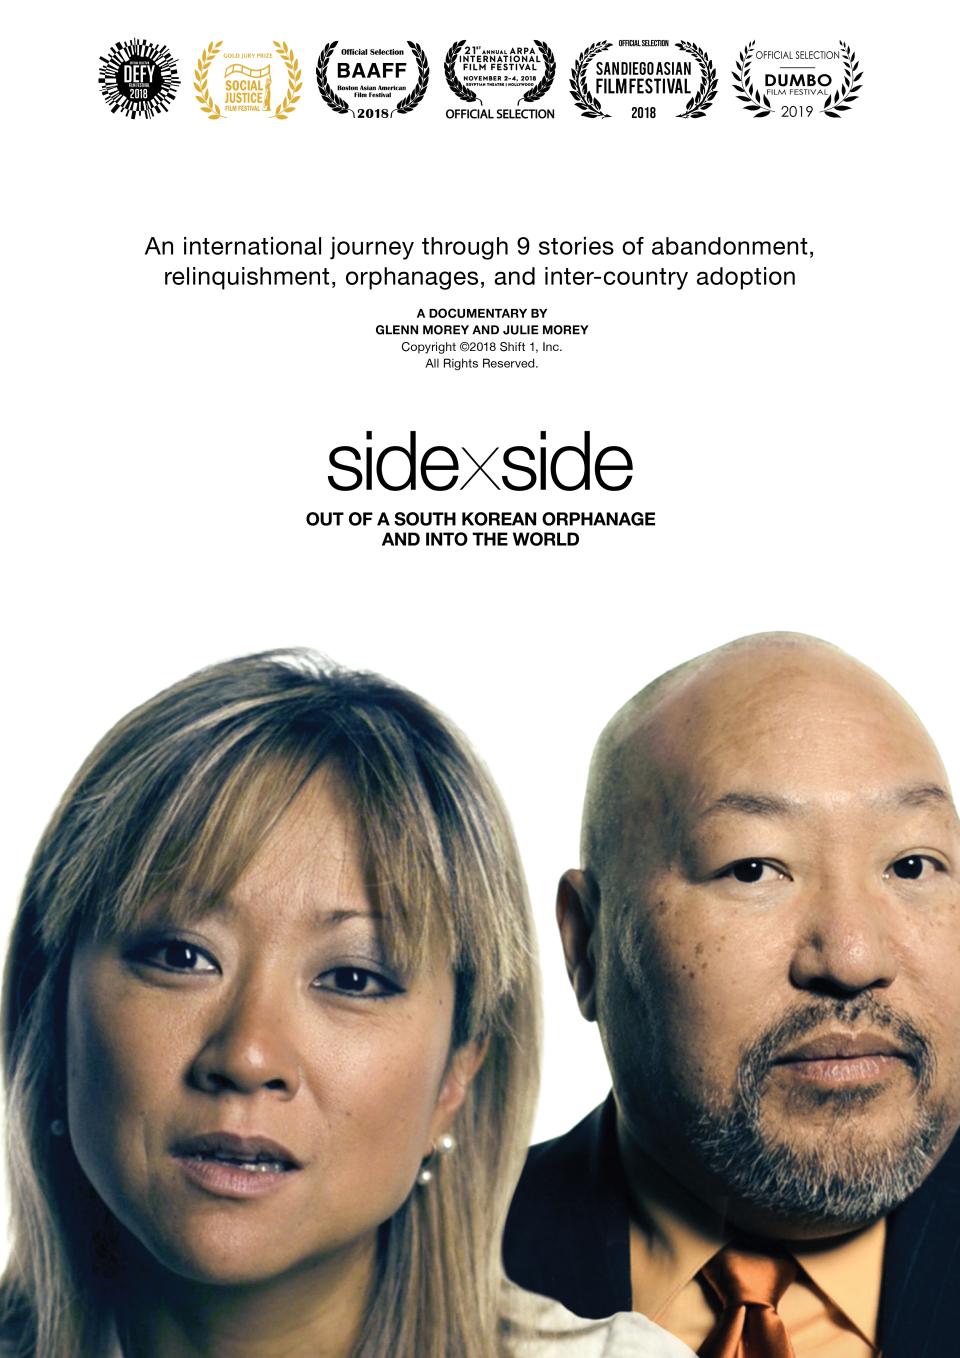 Two people fill the bottom of the frame, a woman on the left and a man on the right. The title "sidexside" and subtitle "Out of a South Korean Orphanage and into the World" appear in the middle of the frame. At the top are several film festival laurels. 